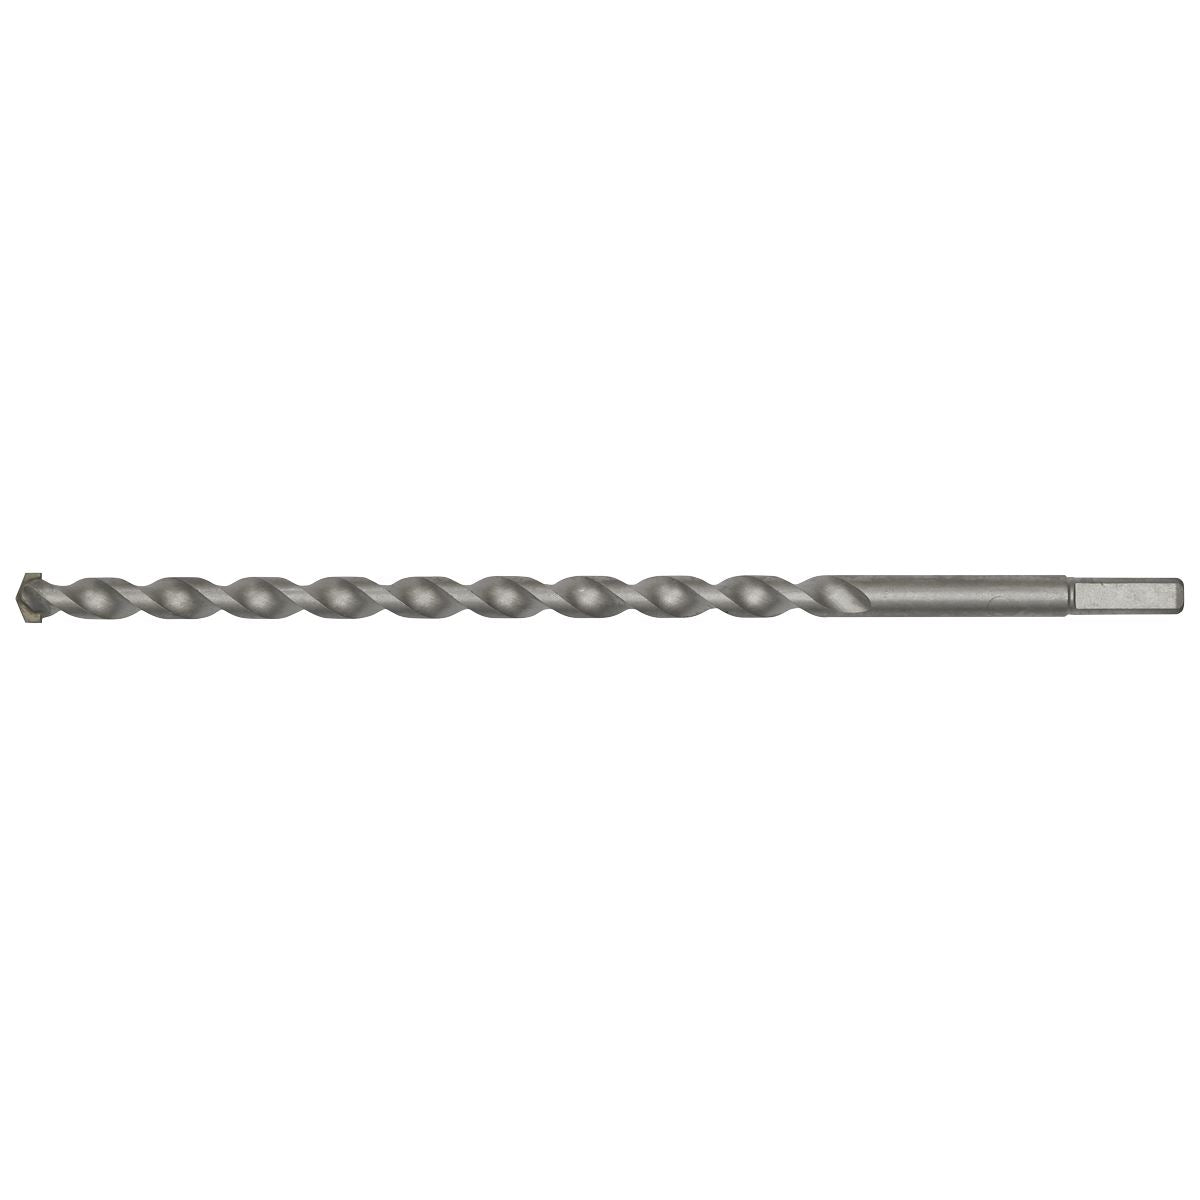 Worksafe by Sealey Straight Shank Rotary Impact Drill Bit Ø13 x 300mm